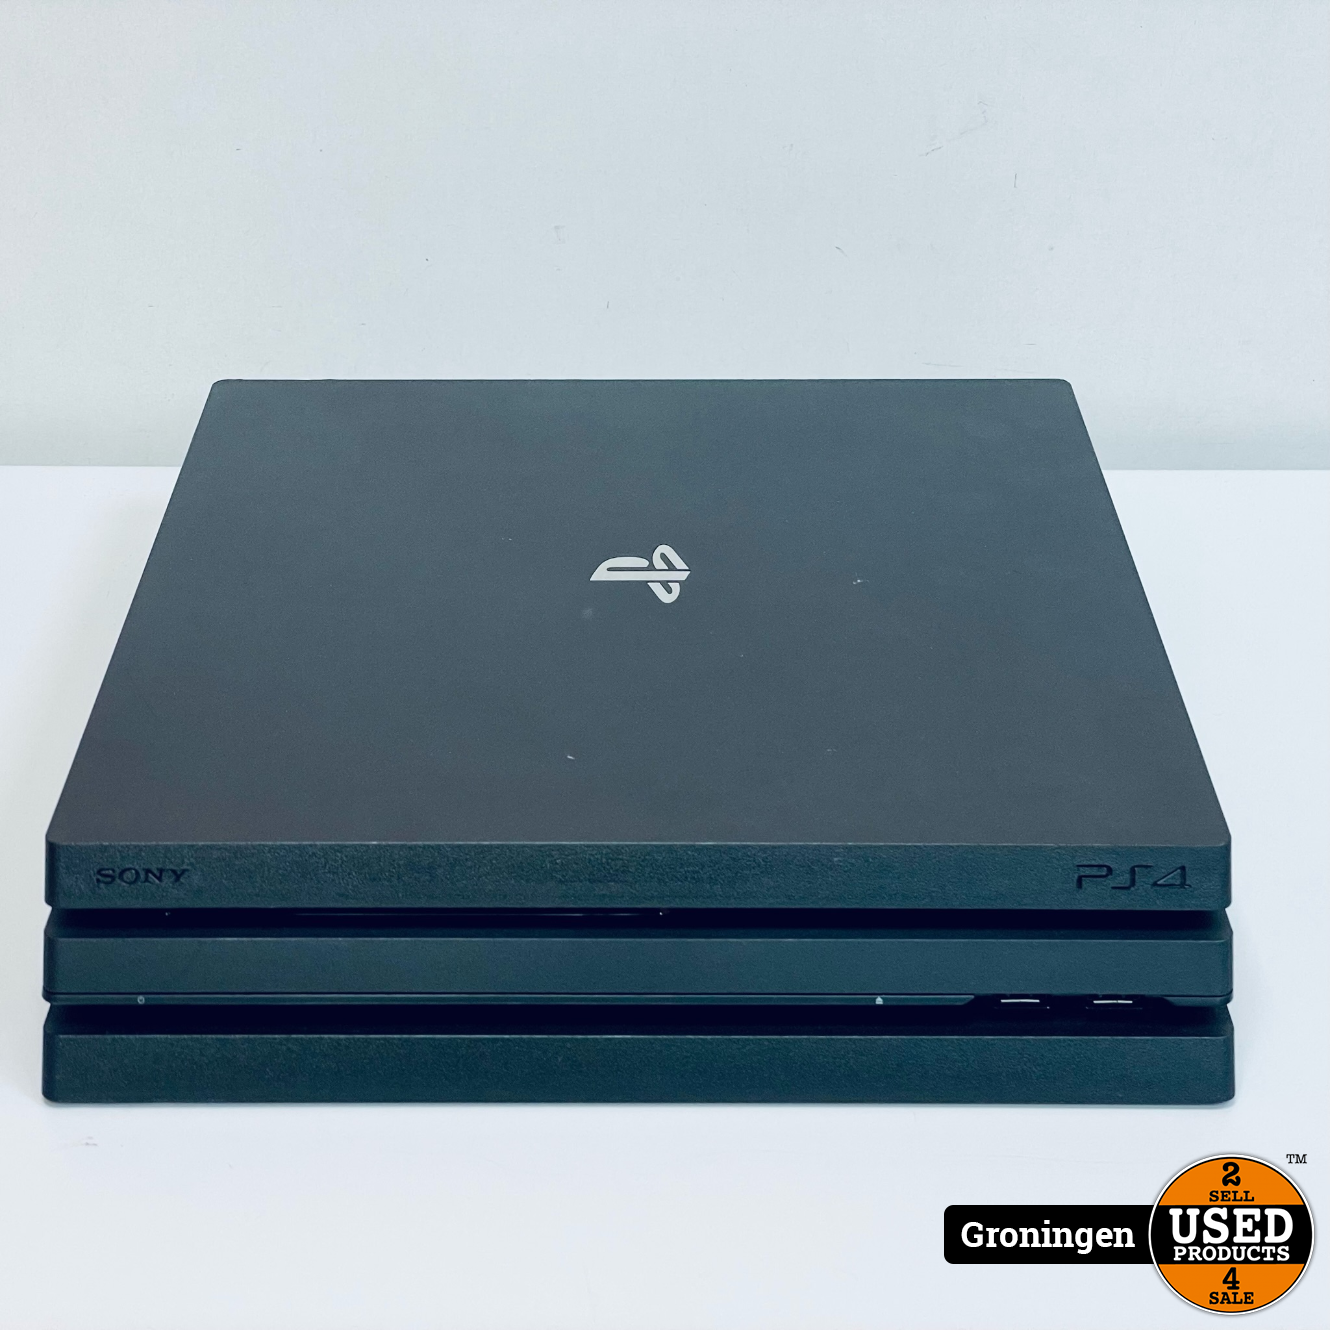 Champagne wacht straffen PS4] Sony PlayStation 4 PRO 1TB Zwart CUH-7216B | excl. Controller - Used  Products Groningen